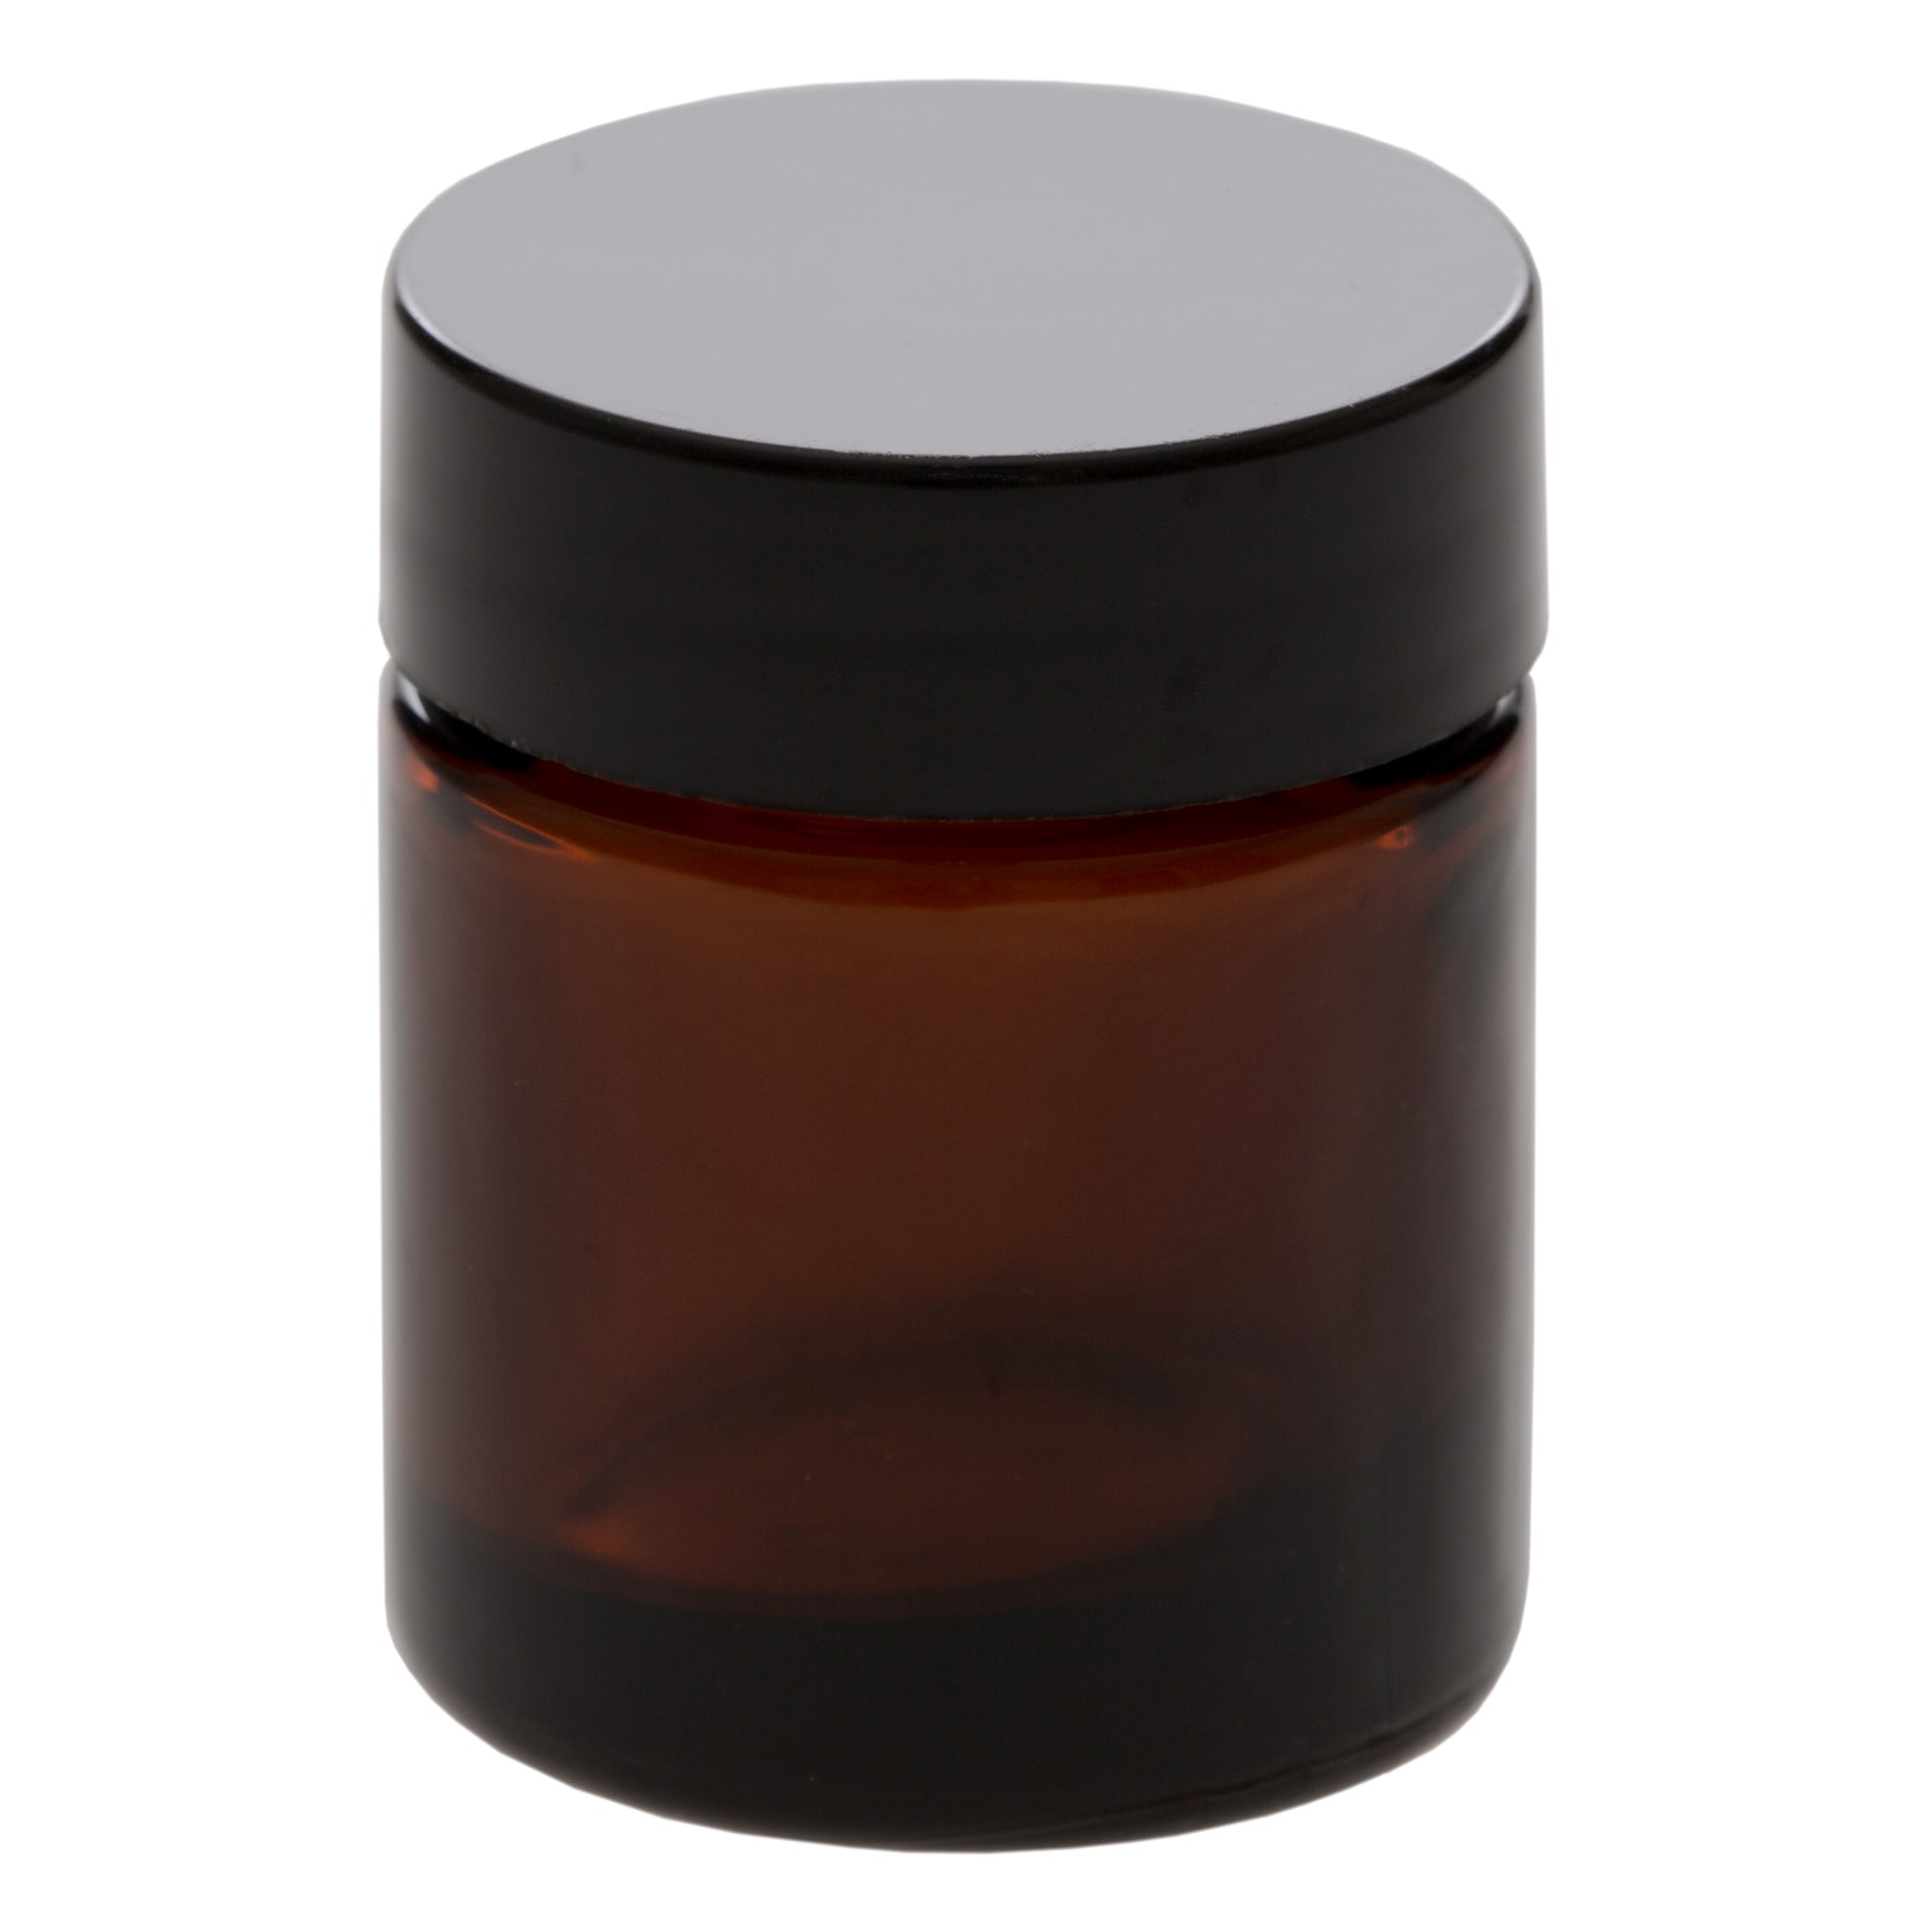 15 ml Amber Glass Jar with 33-400 Black Gloss Smooth Cap